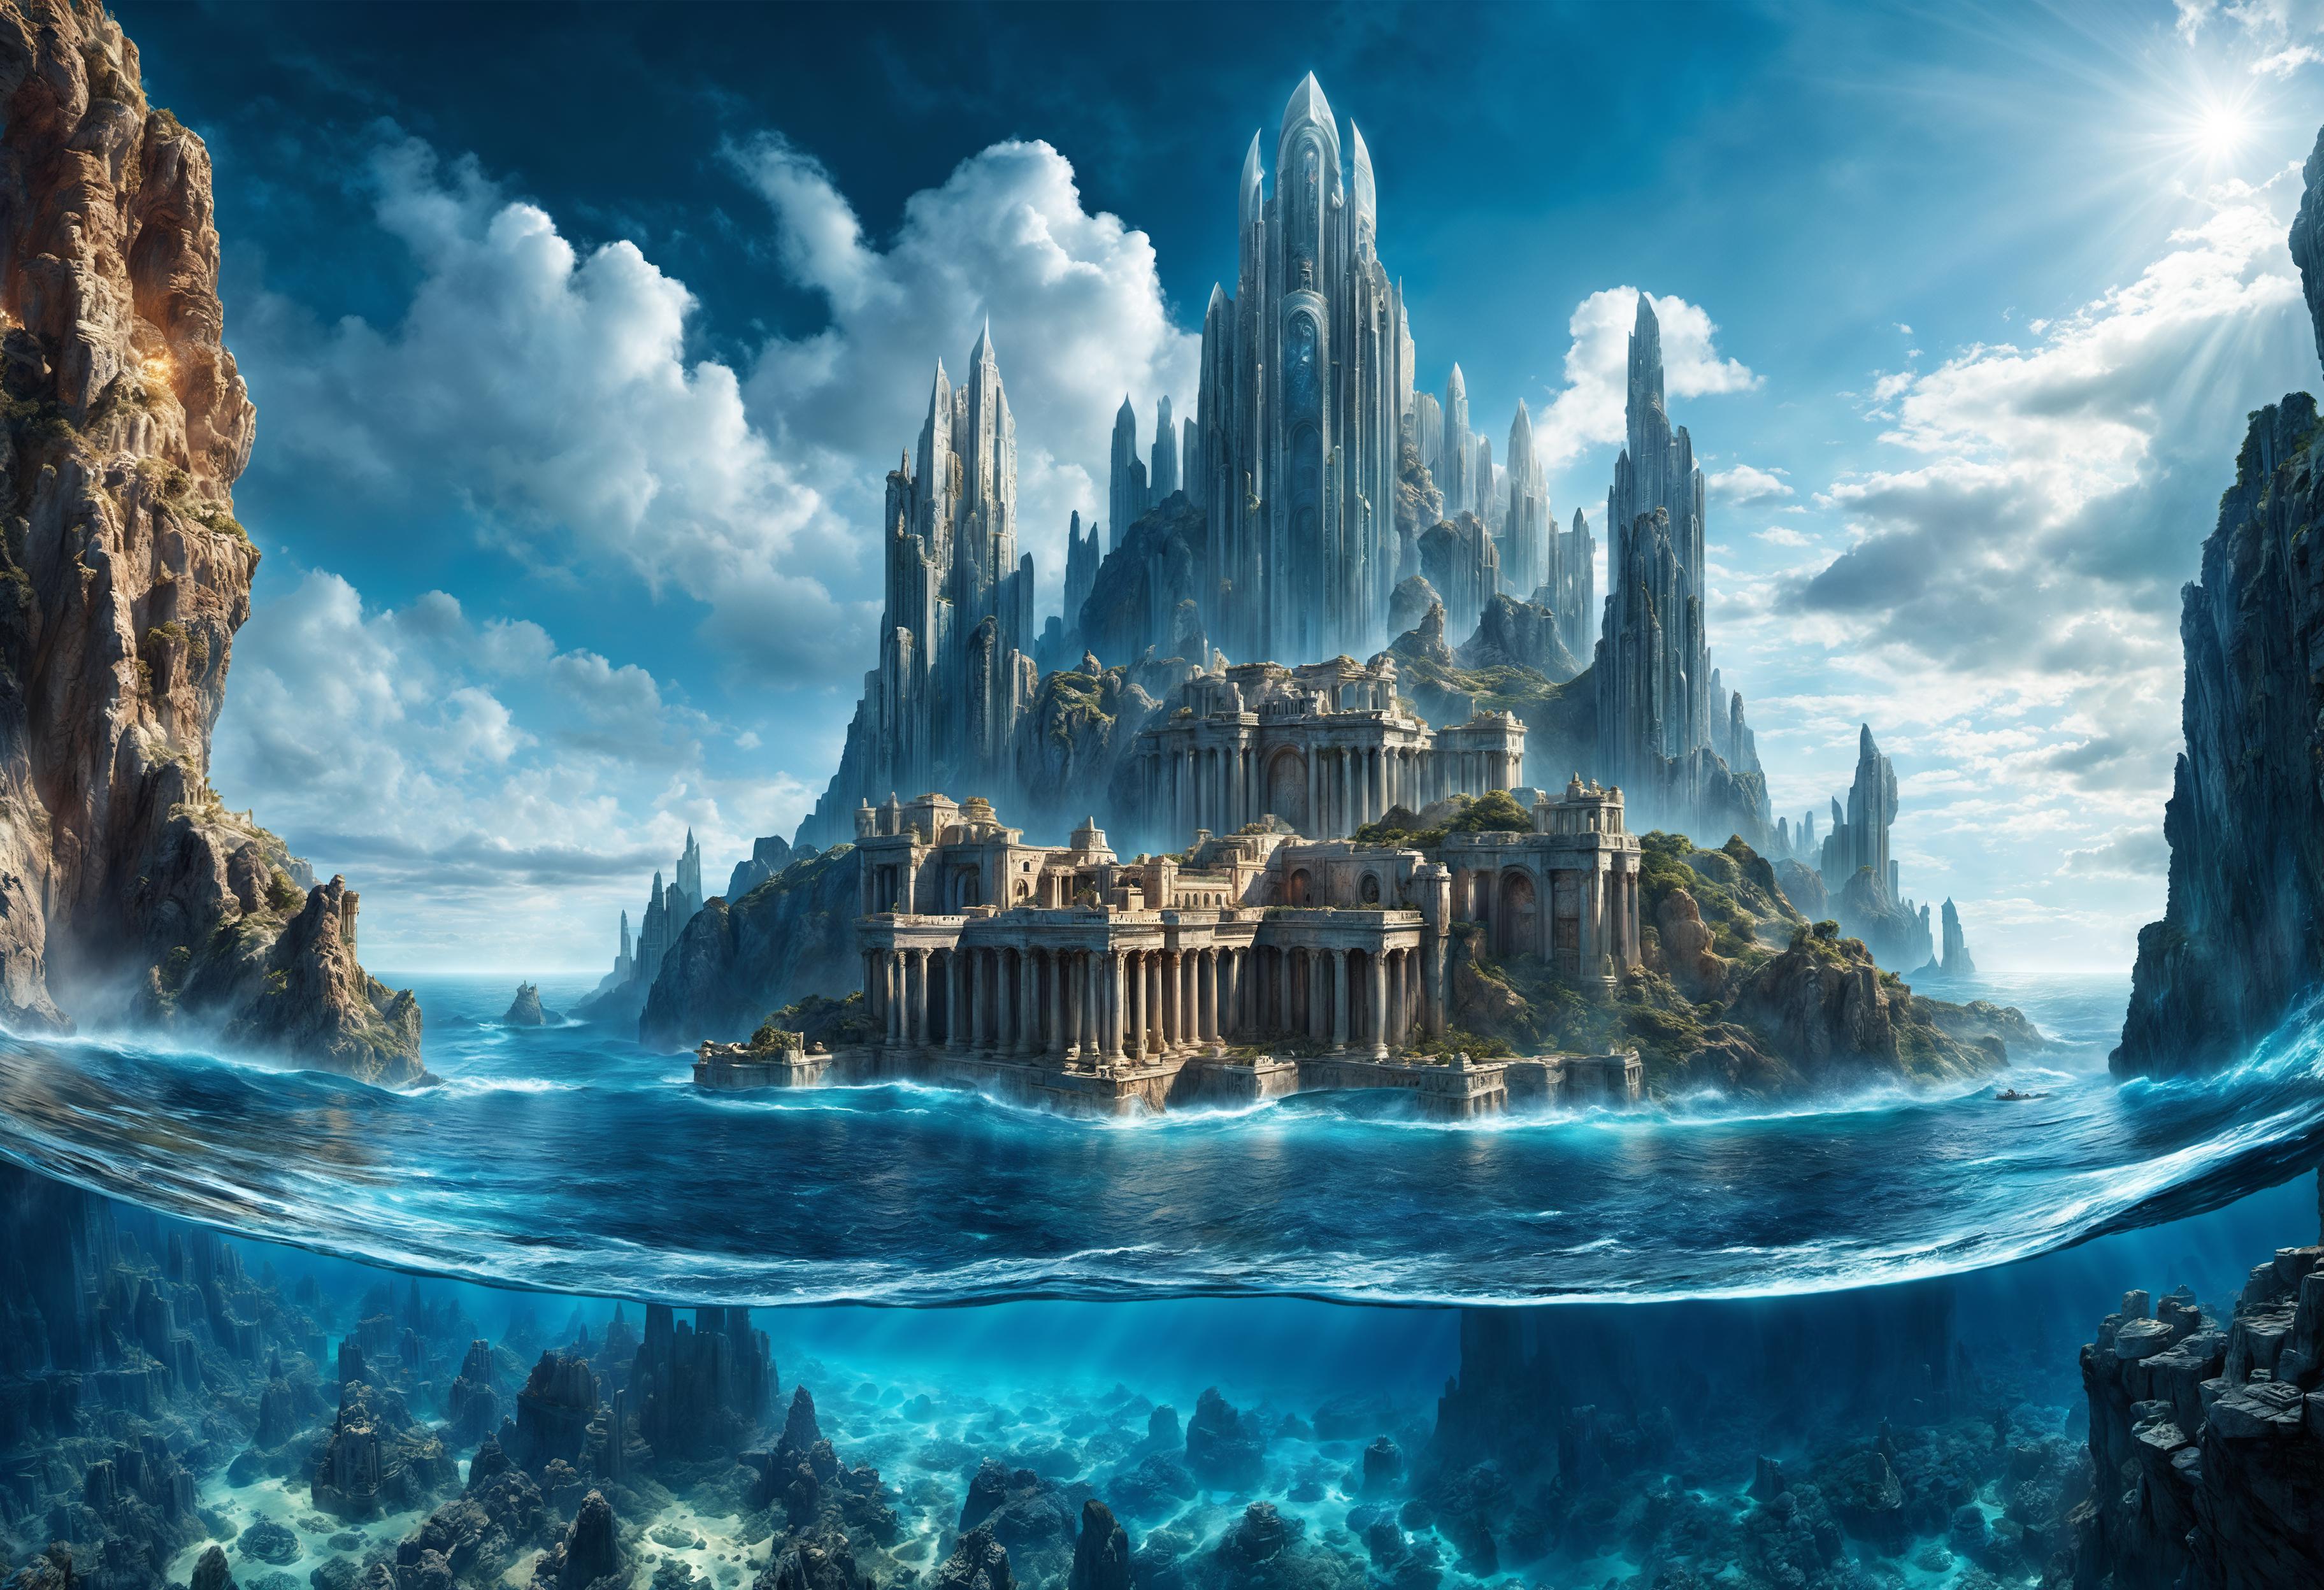 A beautifully rendered digital art piece featuring a castle or palace sitting on top of a body of water, with a blue sky and clouds surrounding it. The scene is breathtaking, giving the impression of a fantasy world with grand architecture.